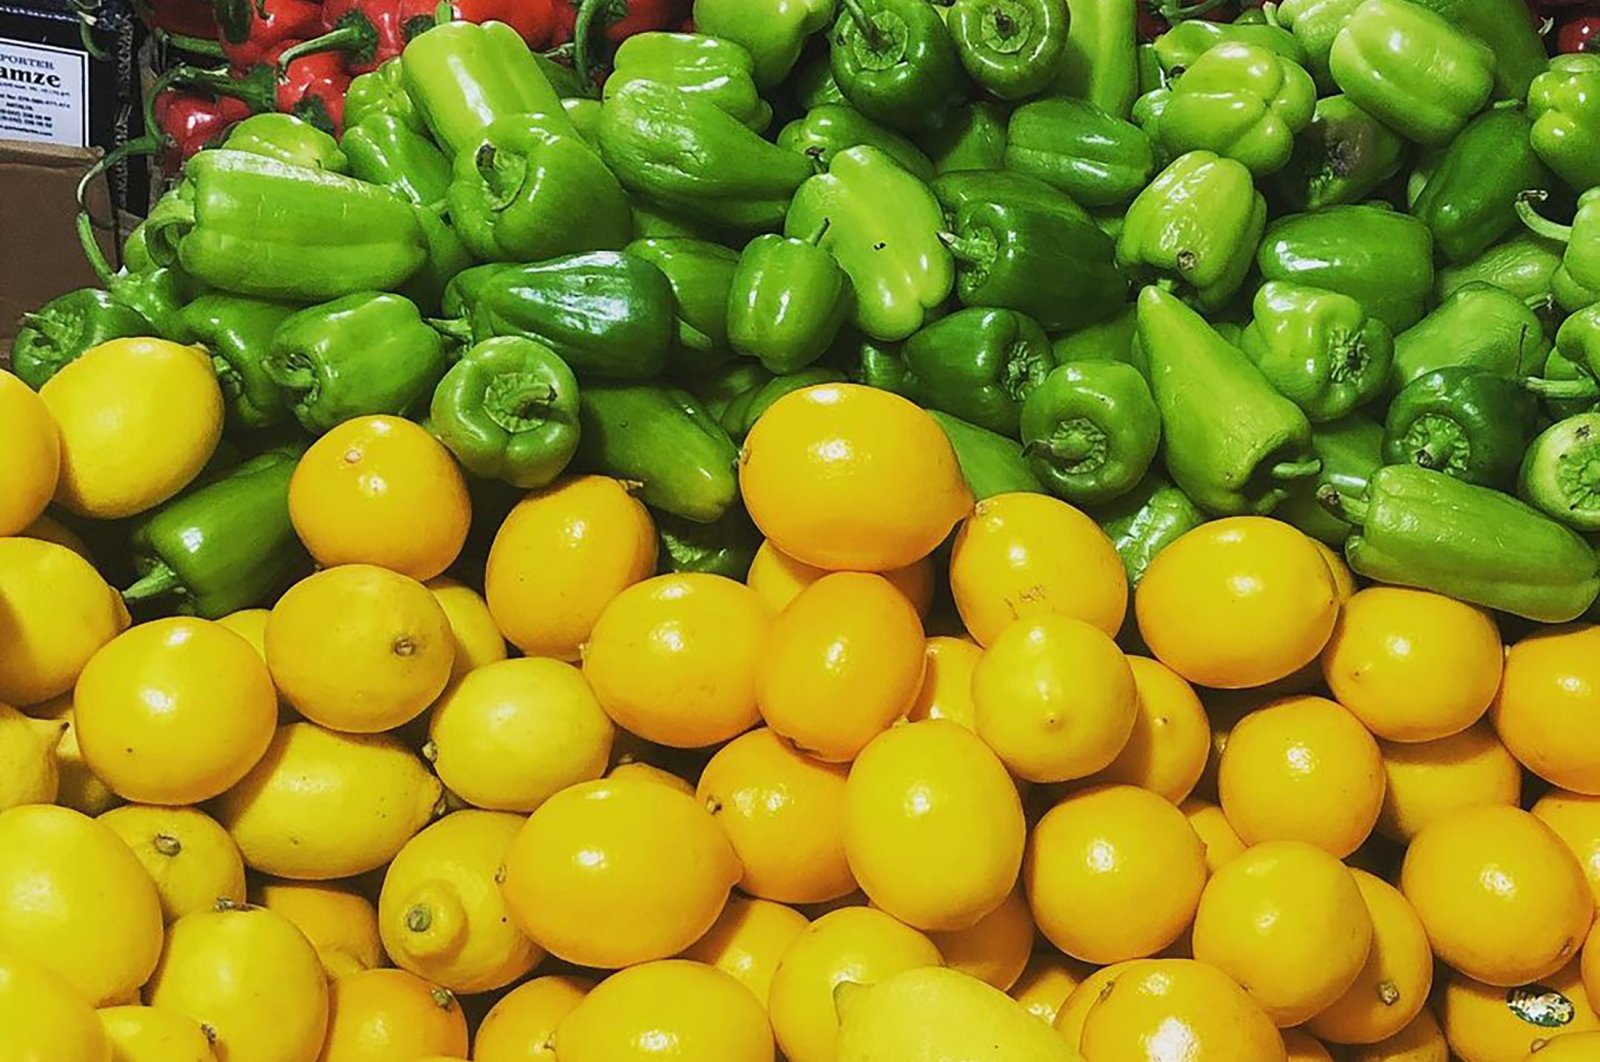 Vegetables can be seen on a stand at greengrocer Umut, in Istanbul, Turkey. (From Instagram / @umutsarkuteri)